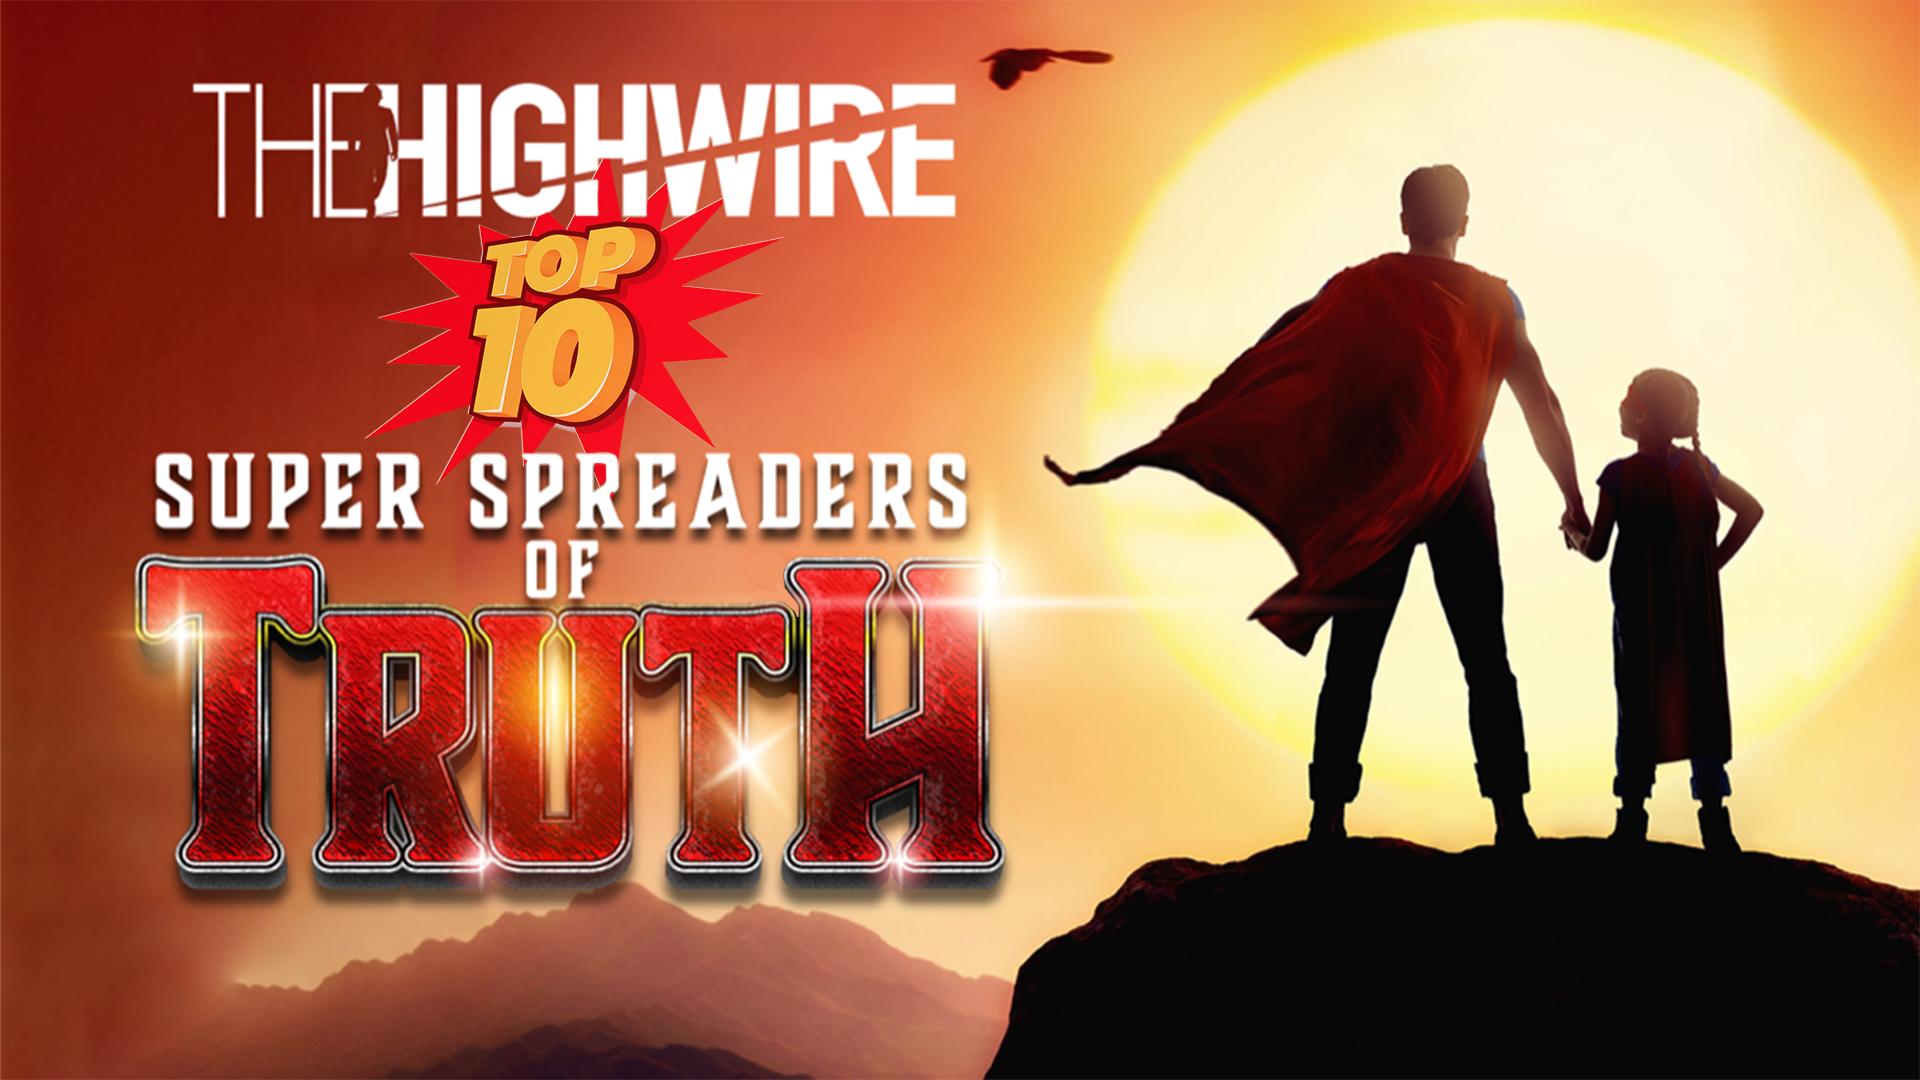 Episode 243: The HighWire TOP 10 SUPER SPREADERS OF TRUTH